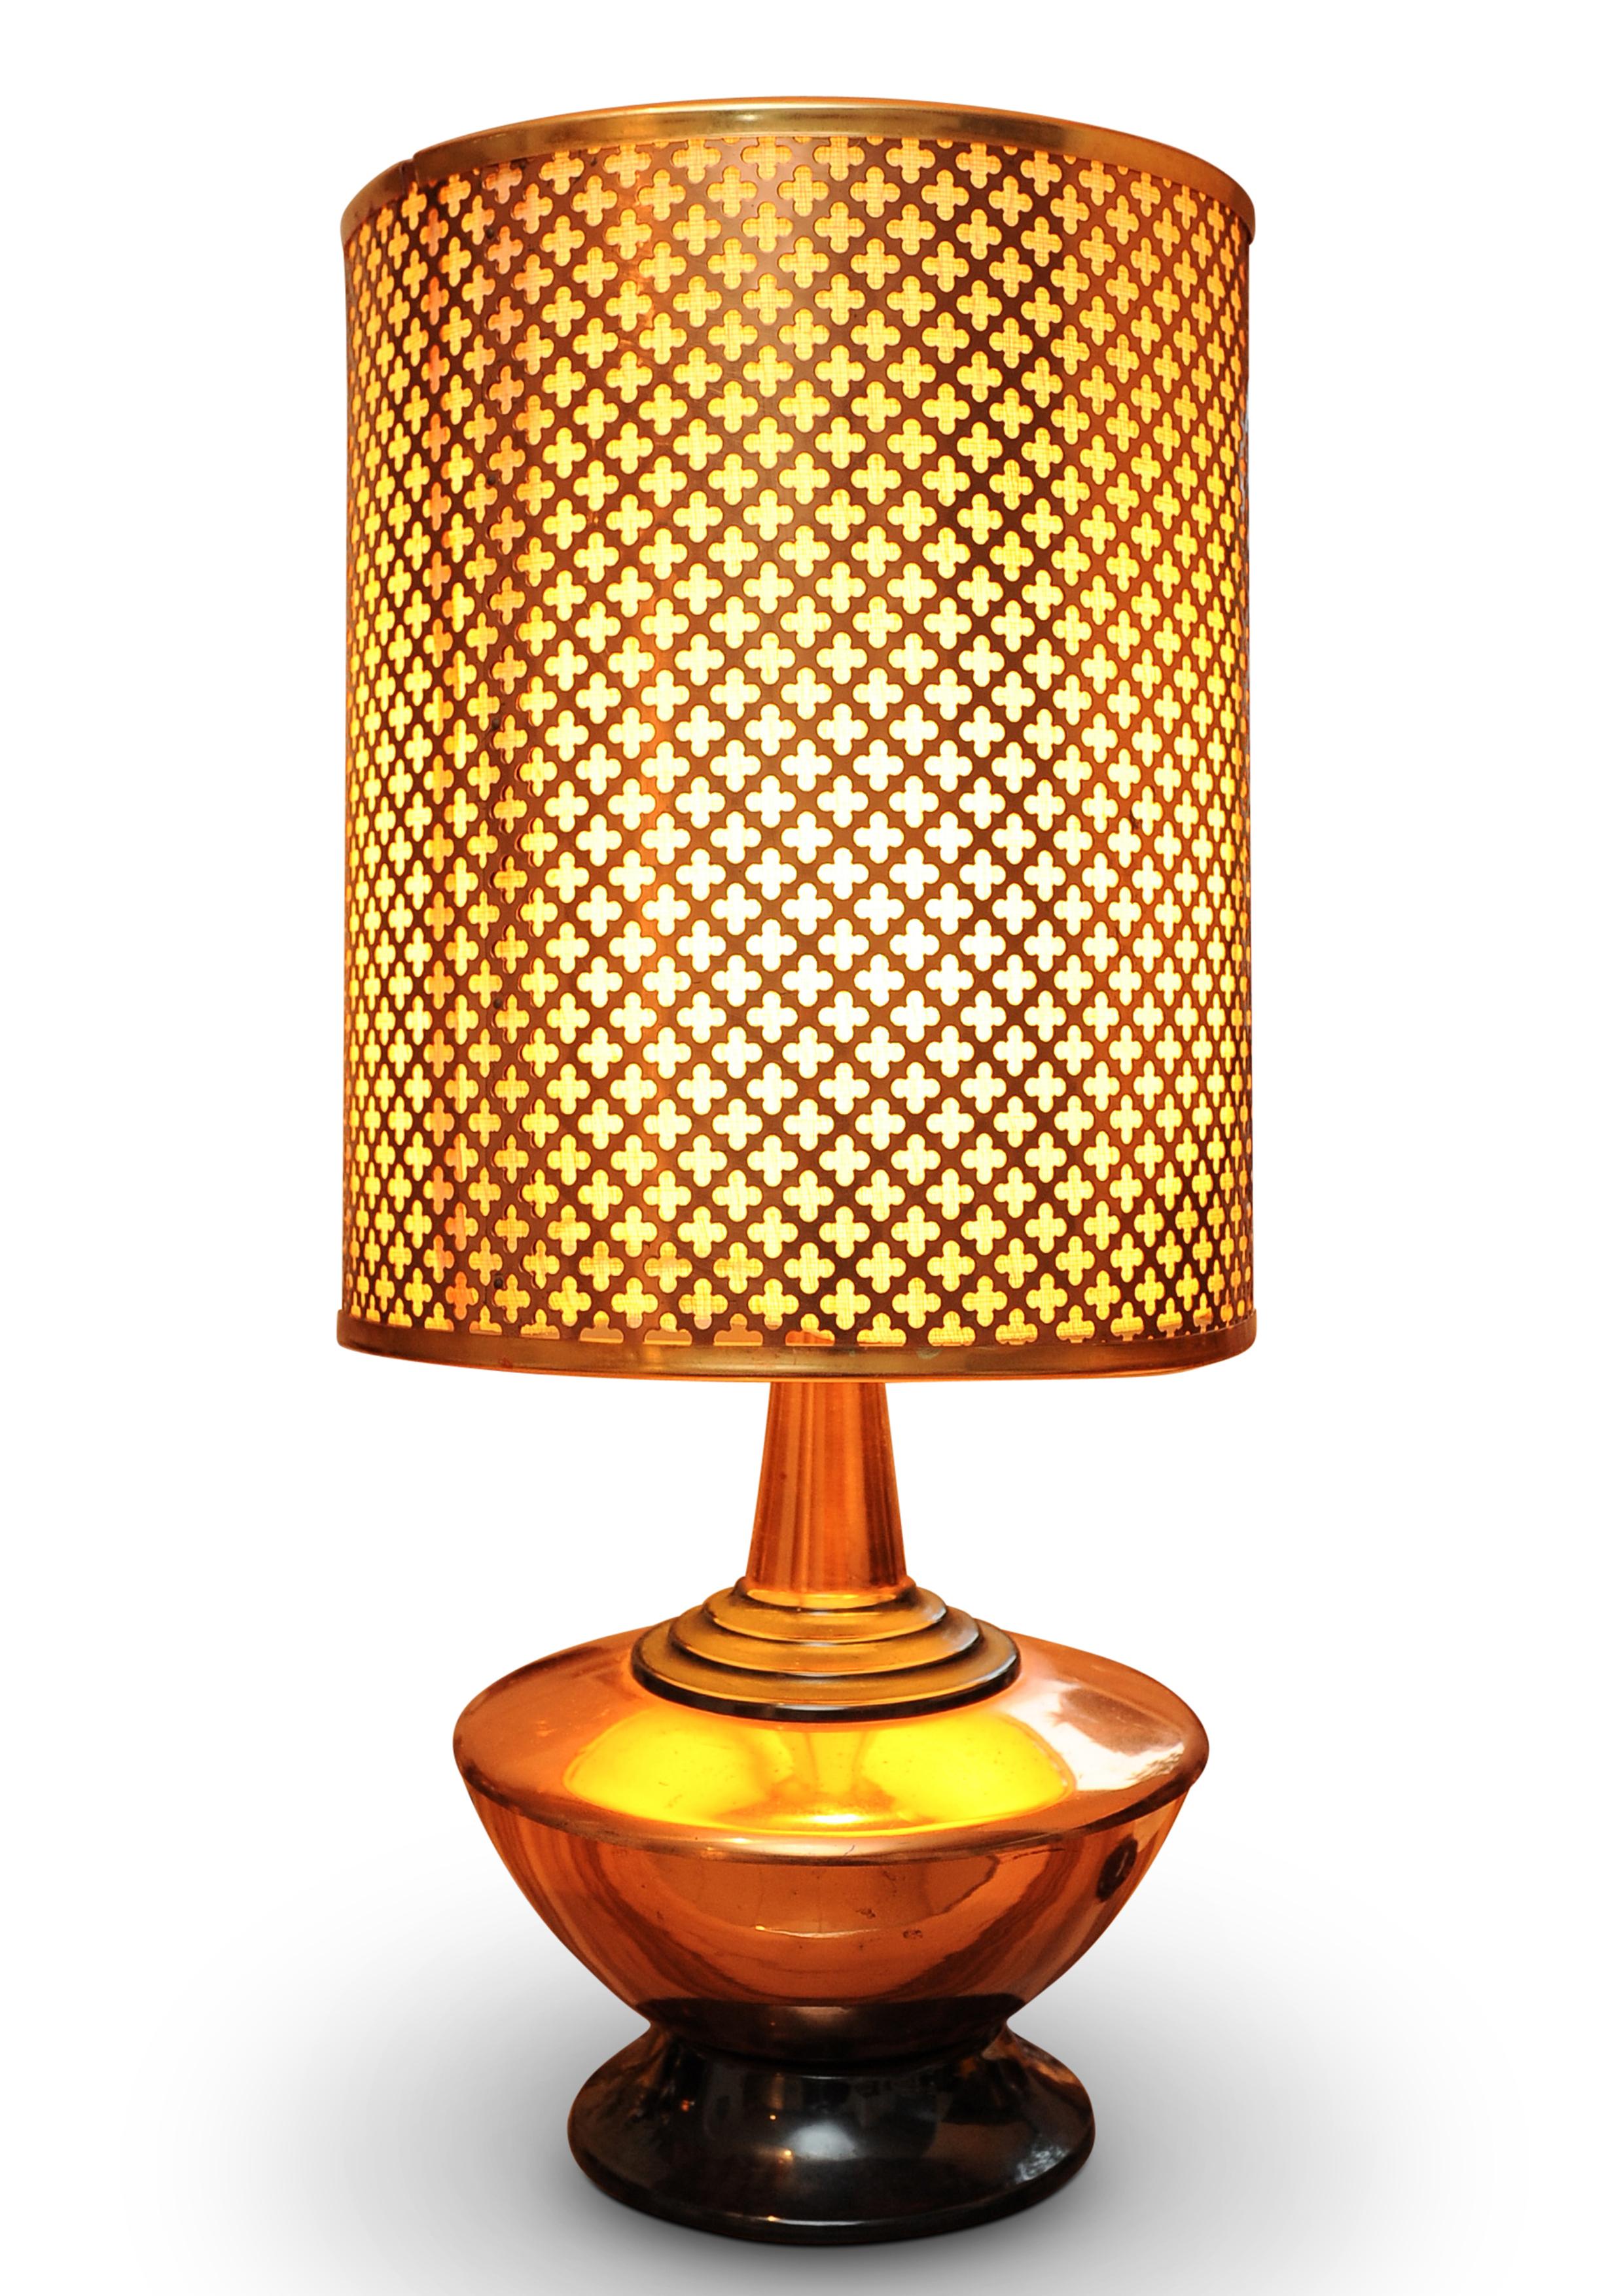 A Zambian Copper Table Lamp With A Repeating Lattice Work Pattern..

Copper shade has a linen back, lamp column features on an ebonised centre.

